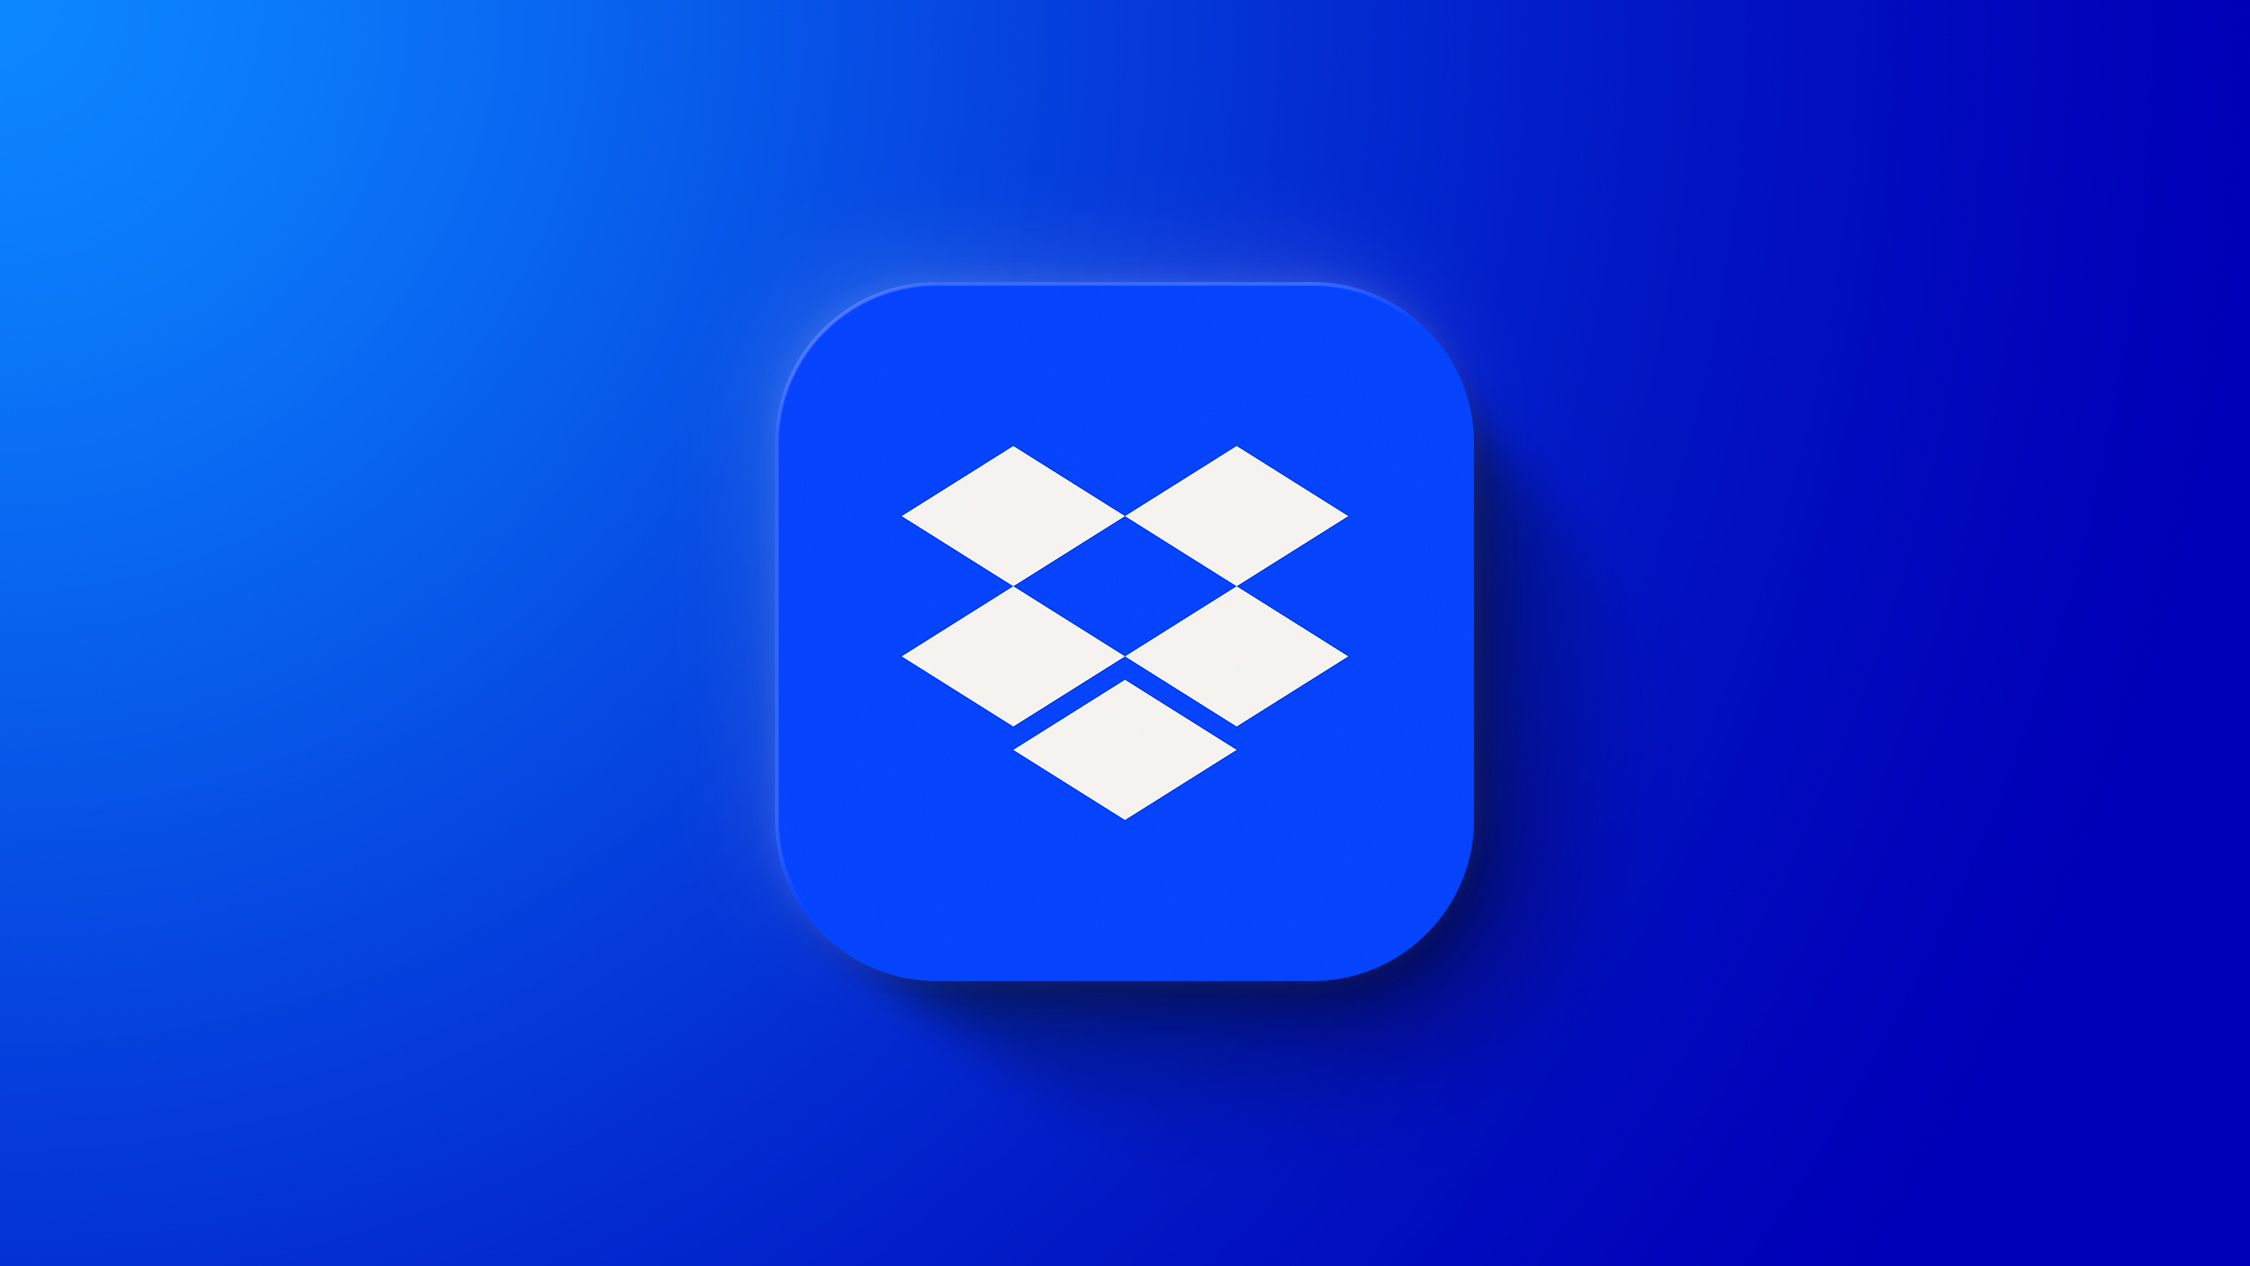 Dropbox Plans to Release Mac App Beta With Full Support for macOS Monterey in Fourth Quarter